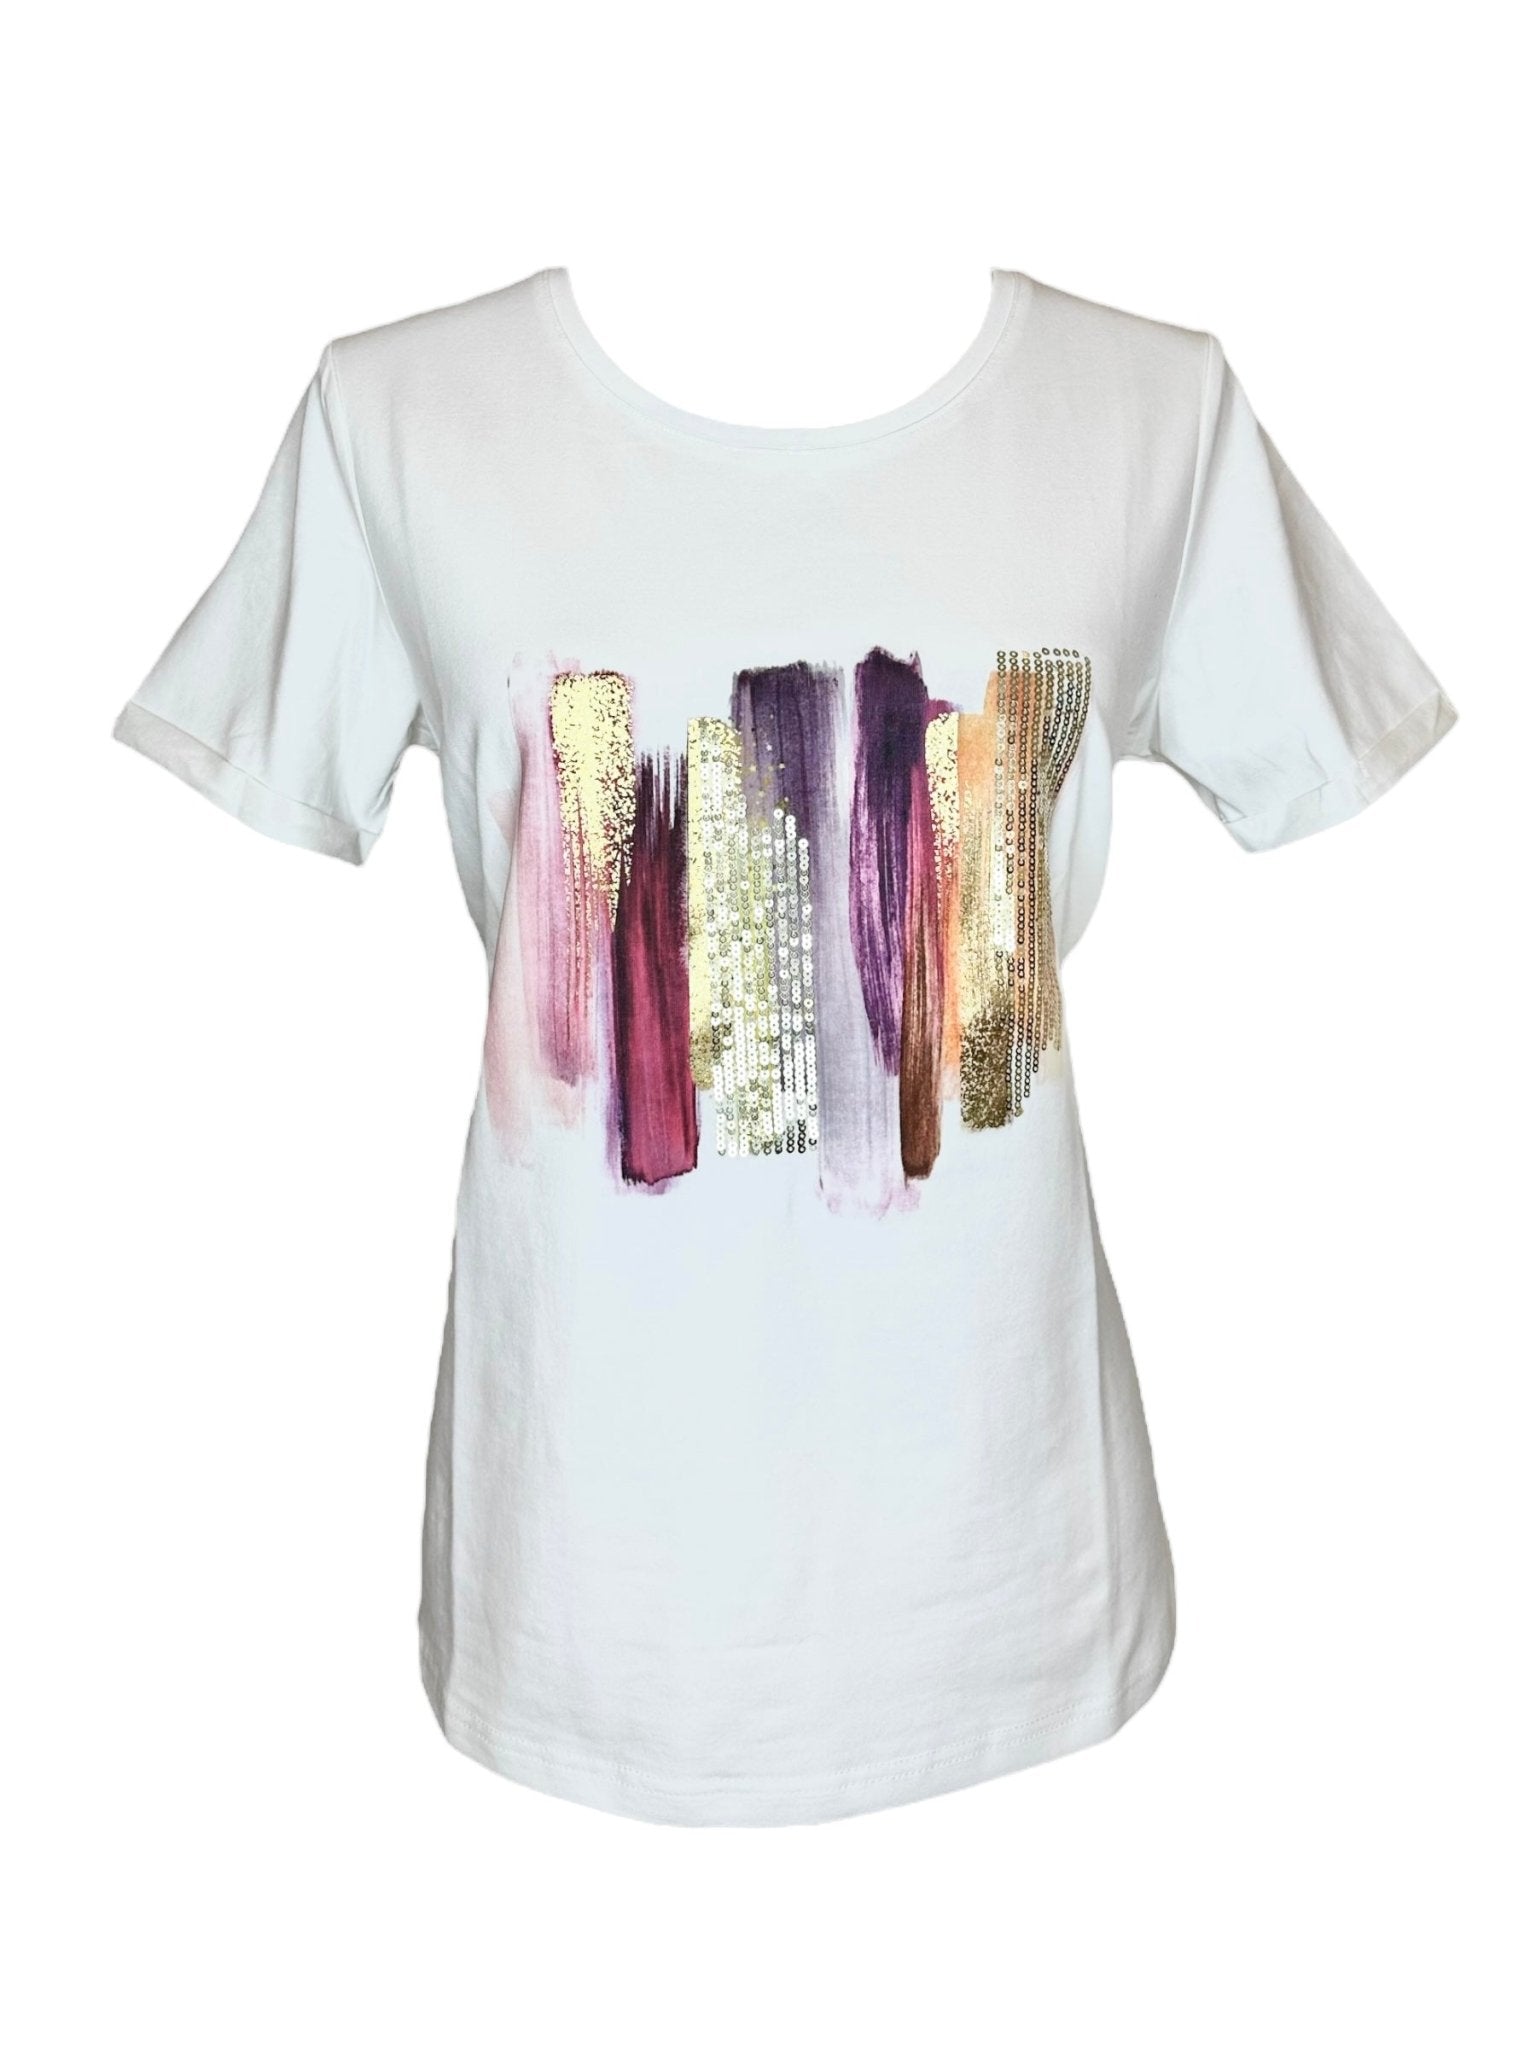 Women's White and Pink Graphic Tee with Sequins – Lala Love Moda